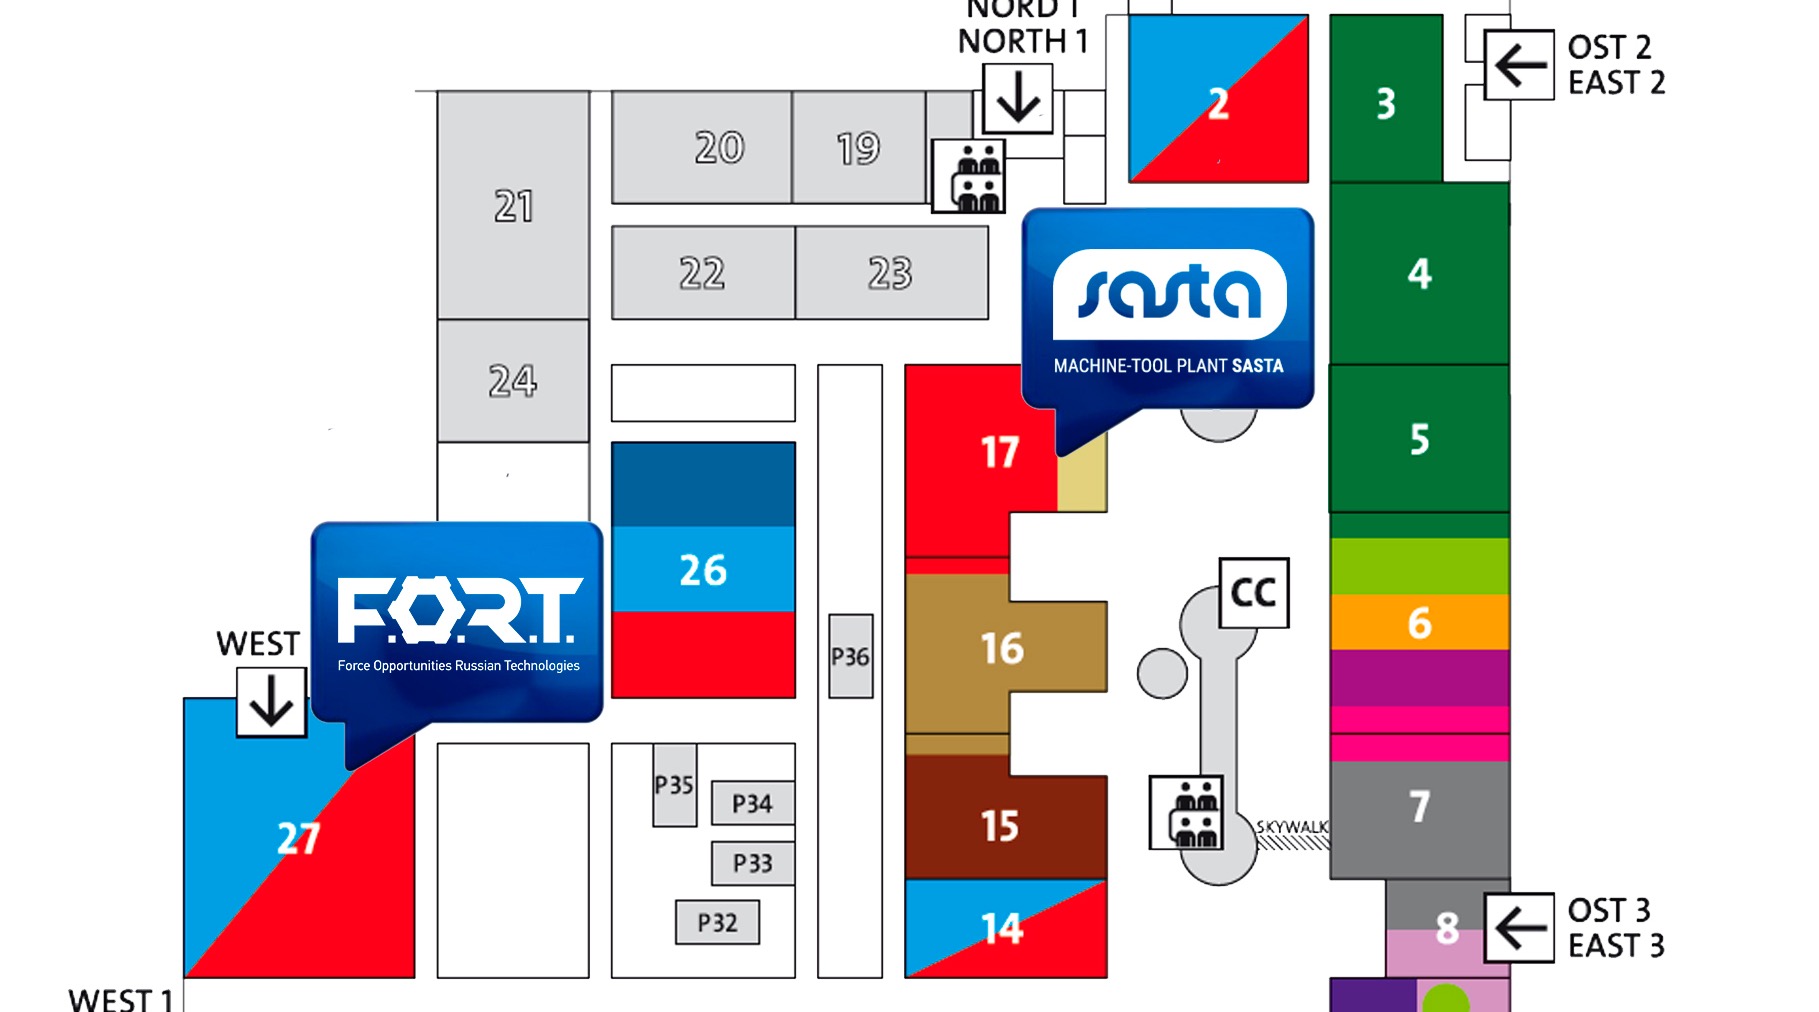 We invite to visit our companies booths at «EMO Hannover 2019» exhibition